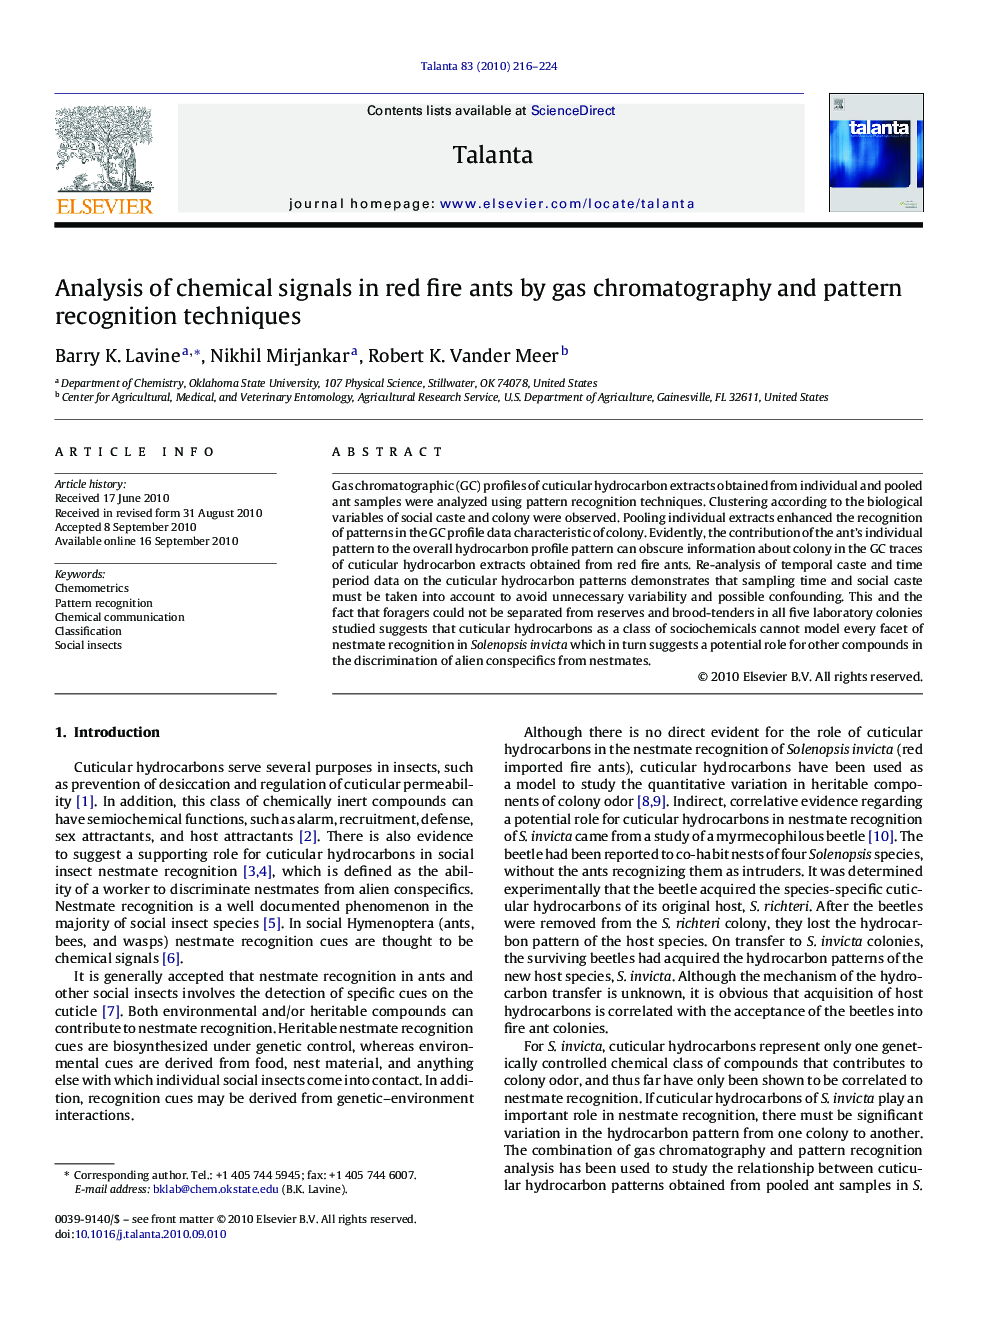 Analysis of chemical signals in red fire ants by gas chromatography and pattern recognition techniques